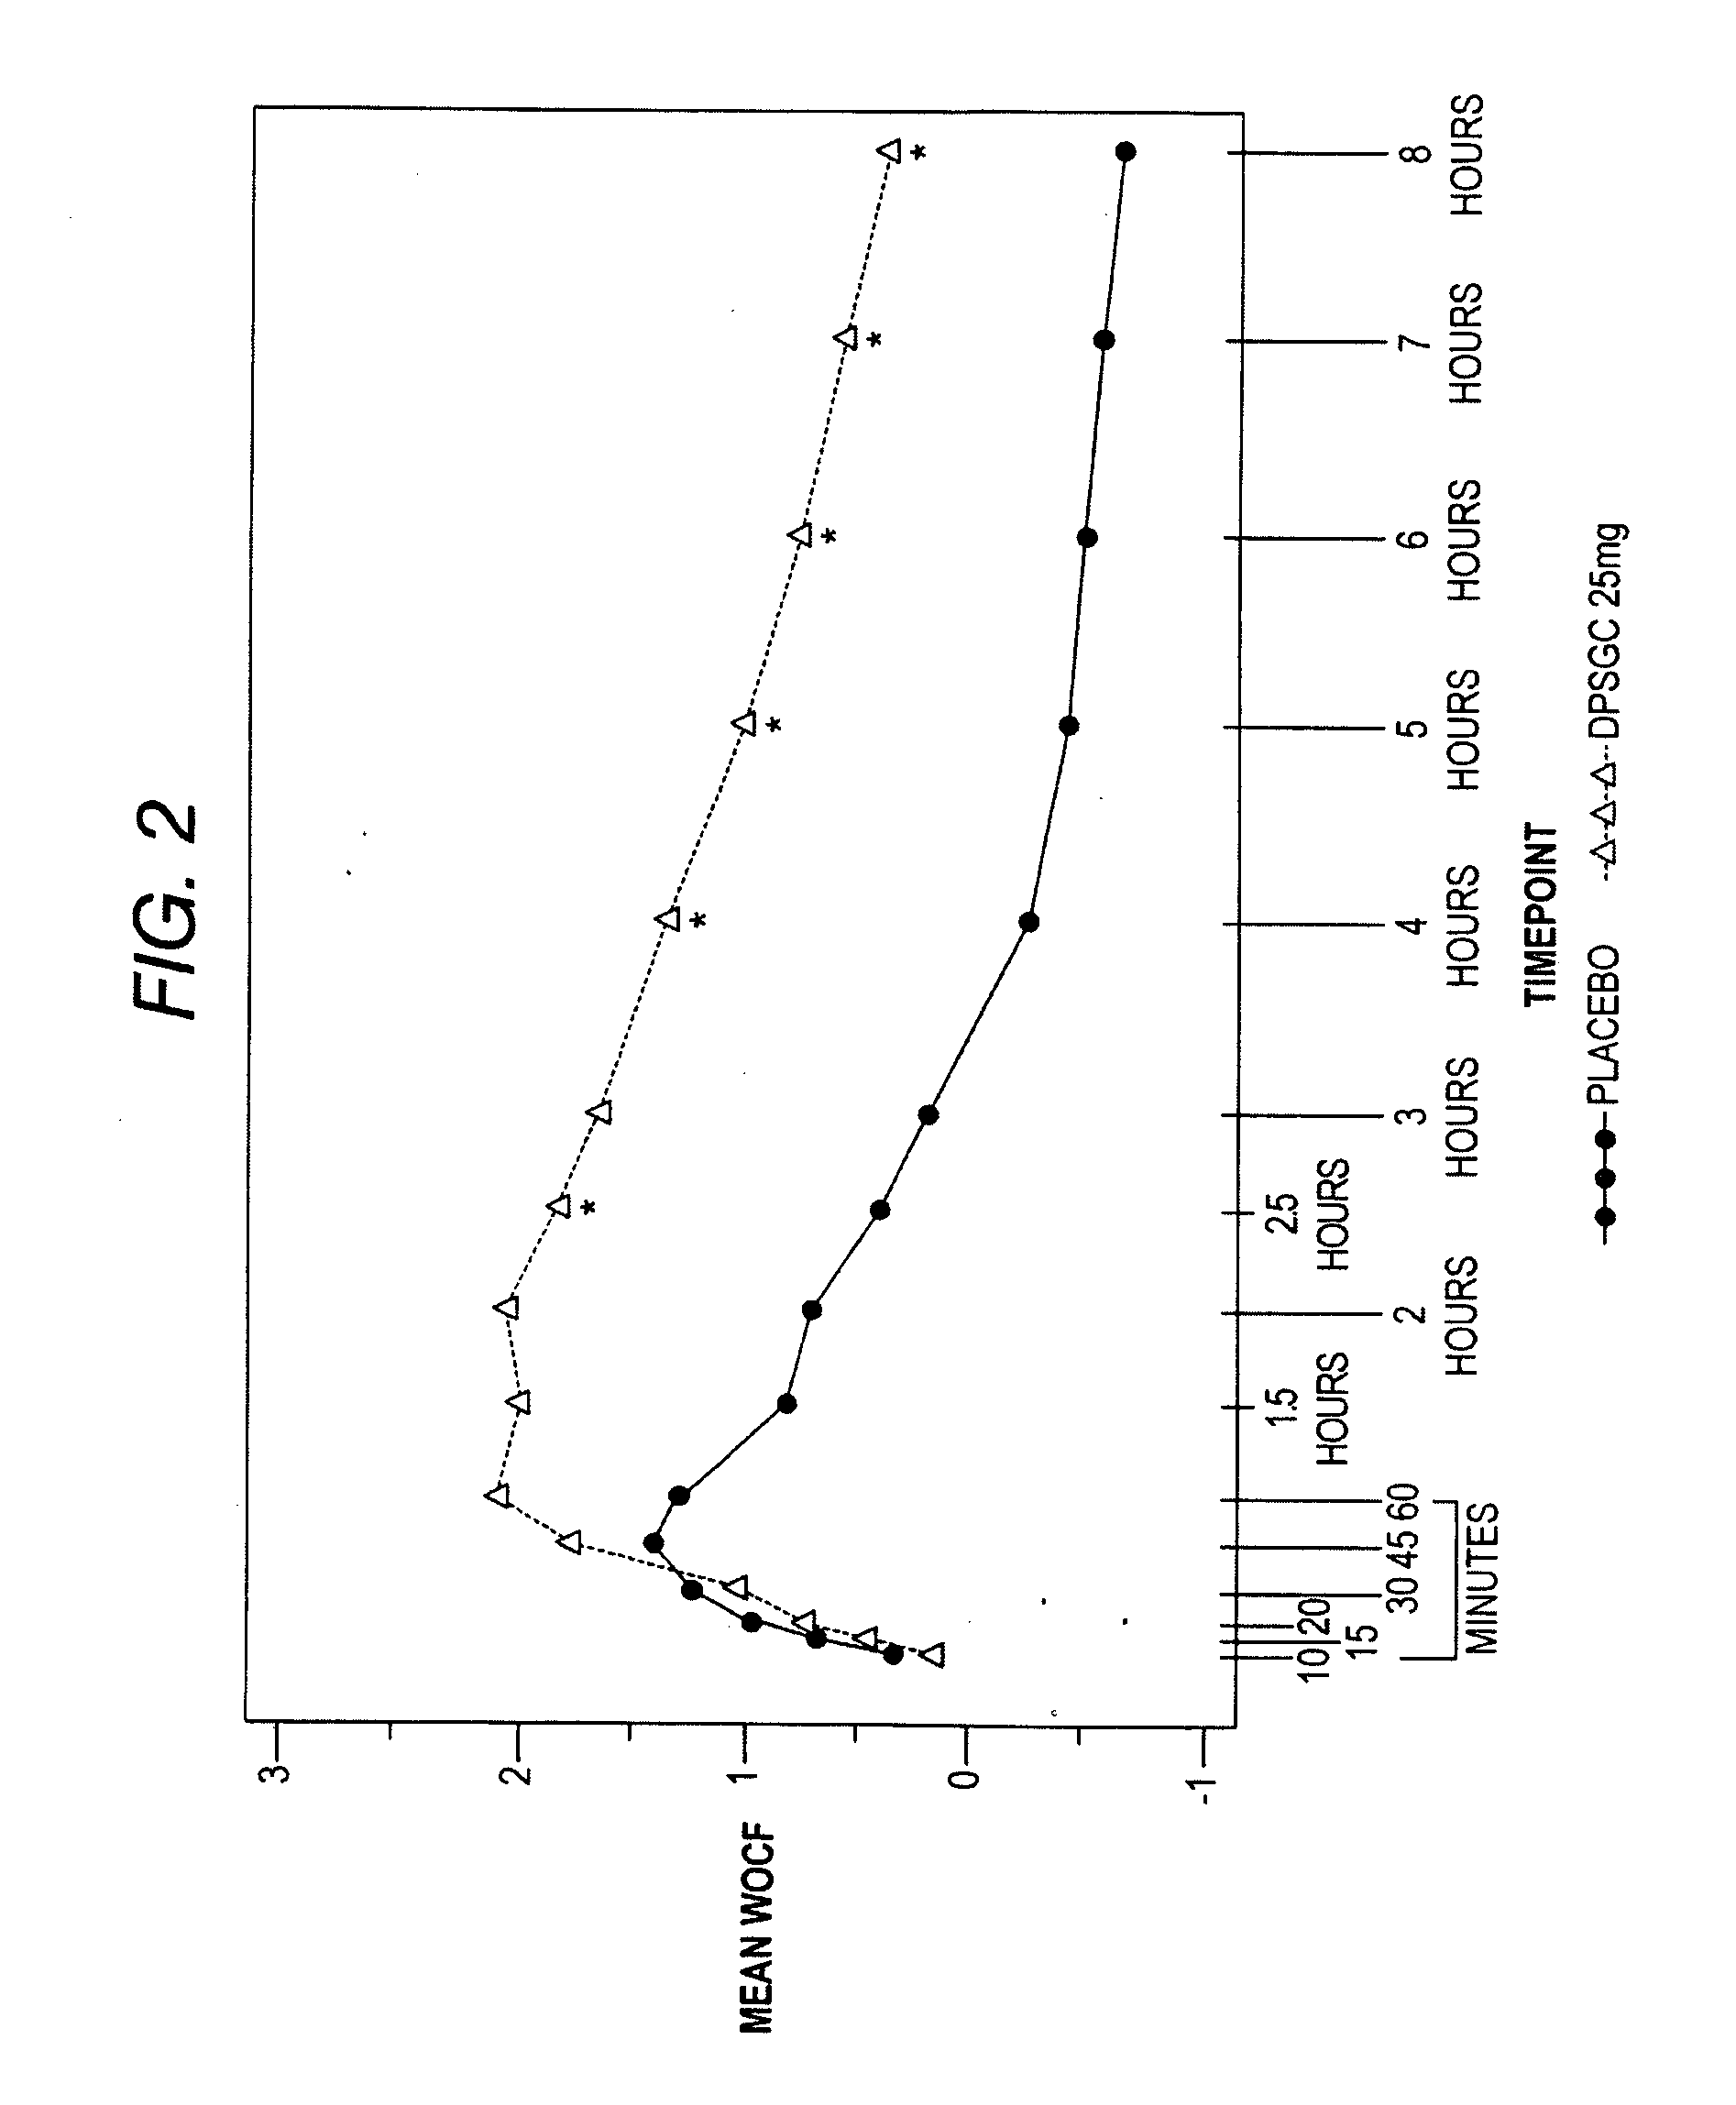 Method of Treating Post-Surgical Acute Pain